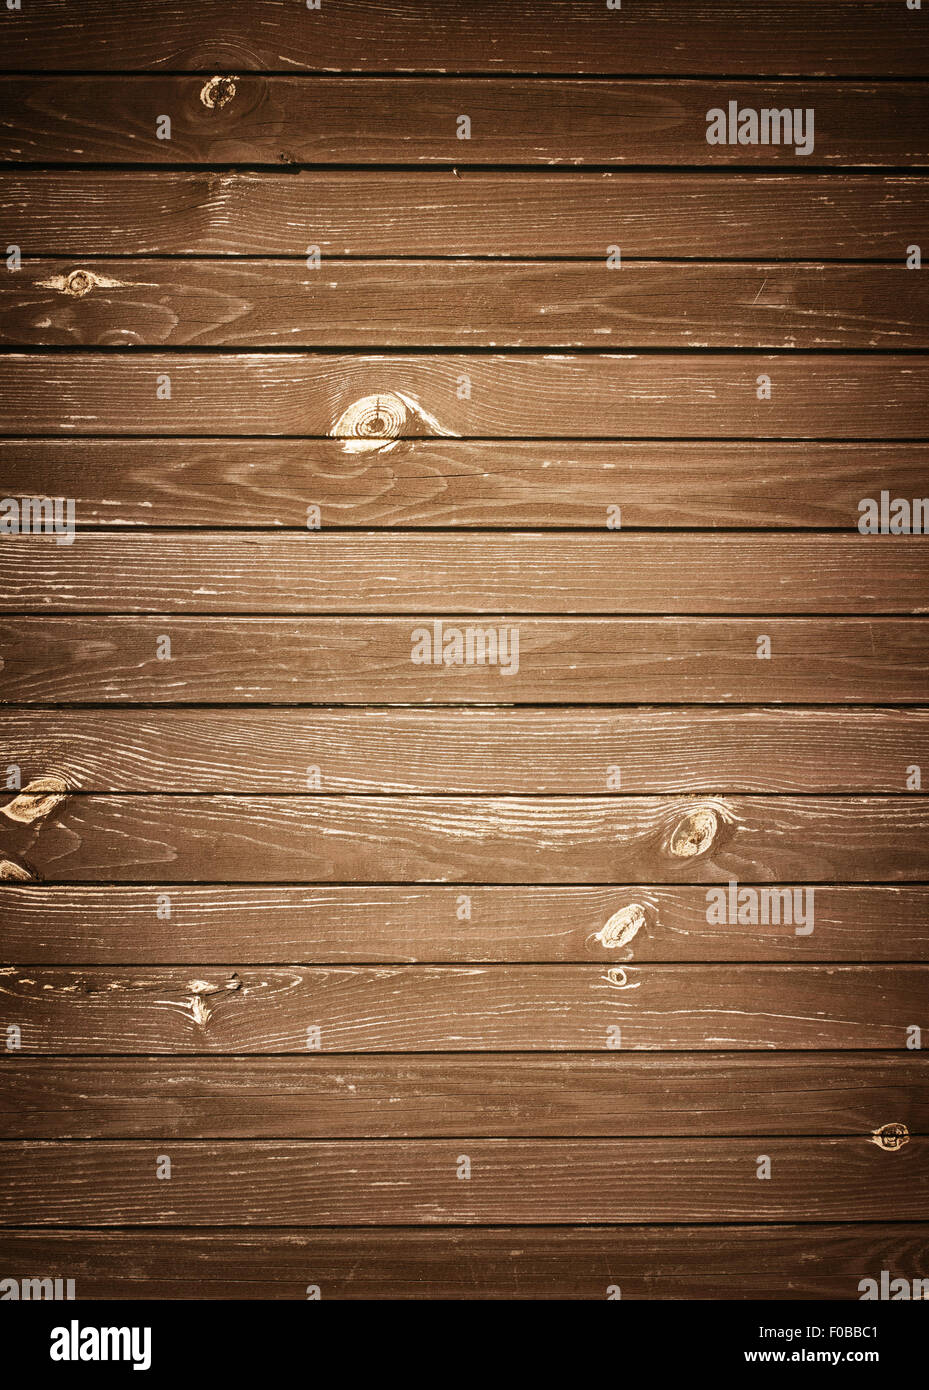 Dark wooden texture with horizontal planks, table, desk or wall surface Stock Photo